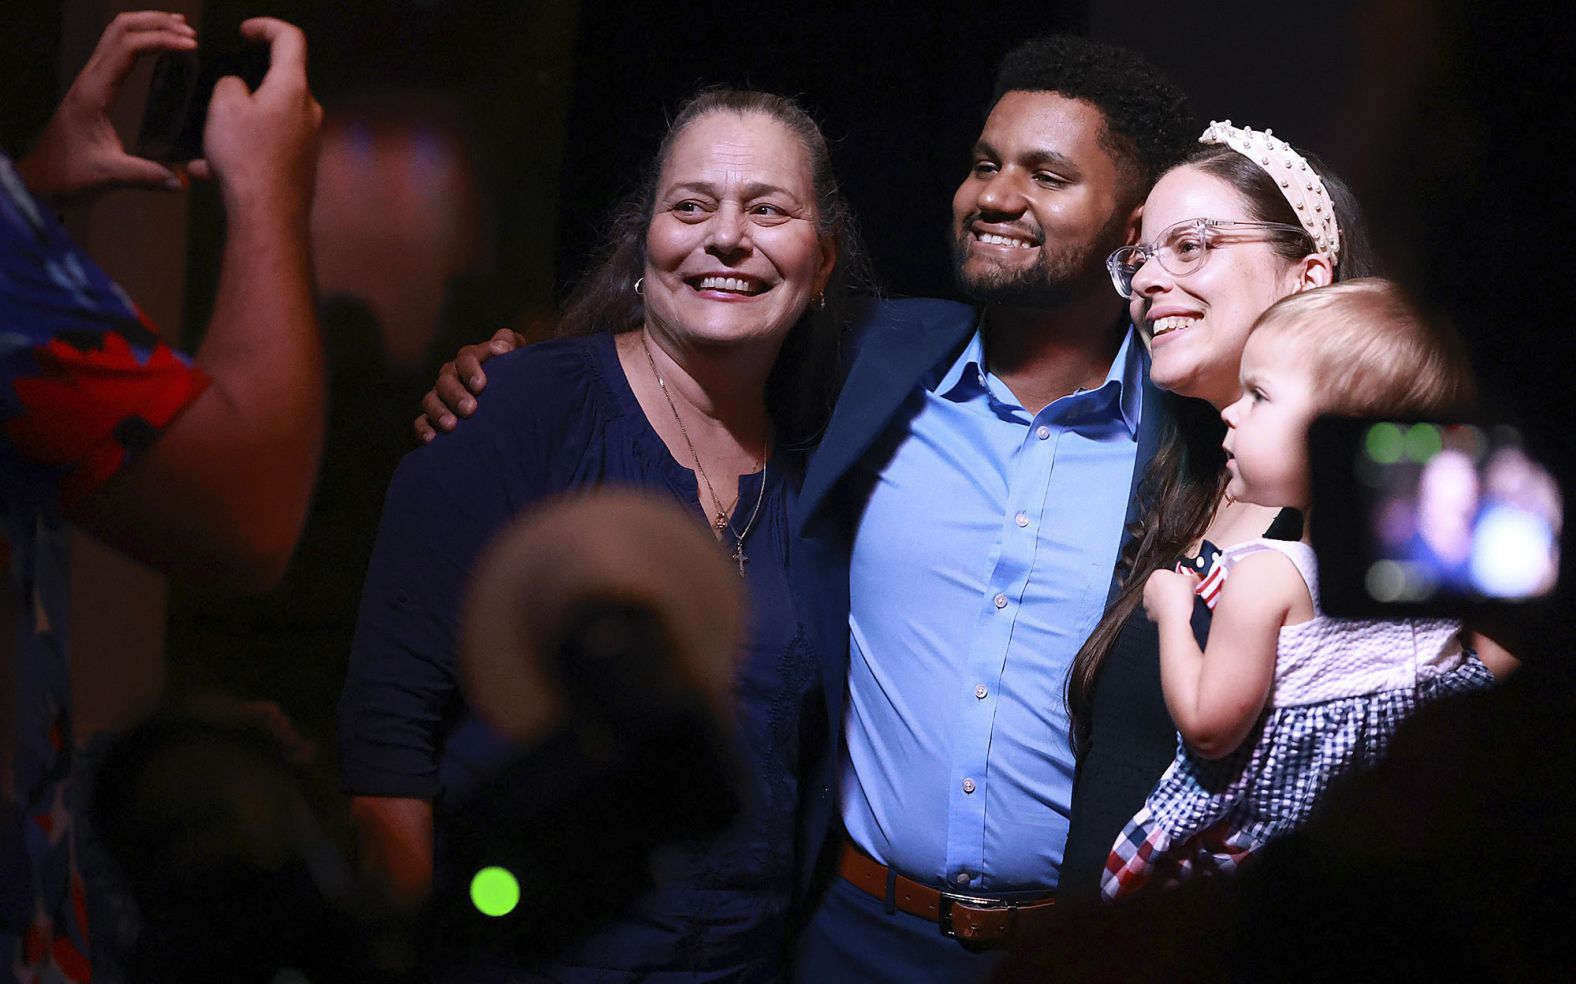 Maxwell Frost poses with supporters during a victory party in Orlando. Frost, a 25-year-old Democrat, <a href="index.php?page=&url=https%3A%2F%2Fwww.cnn.com%2Fpolitics%2Flive-news%2Fmidterm-election-results-livestream-voting-11-08-2022%2Fh_afe8fca2ddf486d8725e40e89bcbcfd5" target="_blank">was projected to win the open House seat in Florida's 10th Congressional District.</a> That would make him the first member of Generation Z elected to Congress. Members of Gen Z — those born after 1996 — are now old enough to be elected to the House.